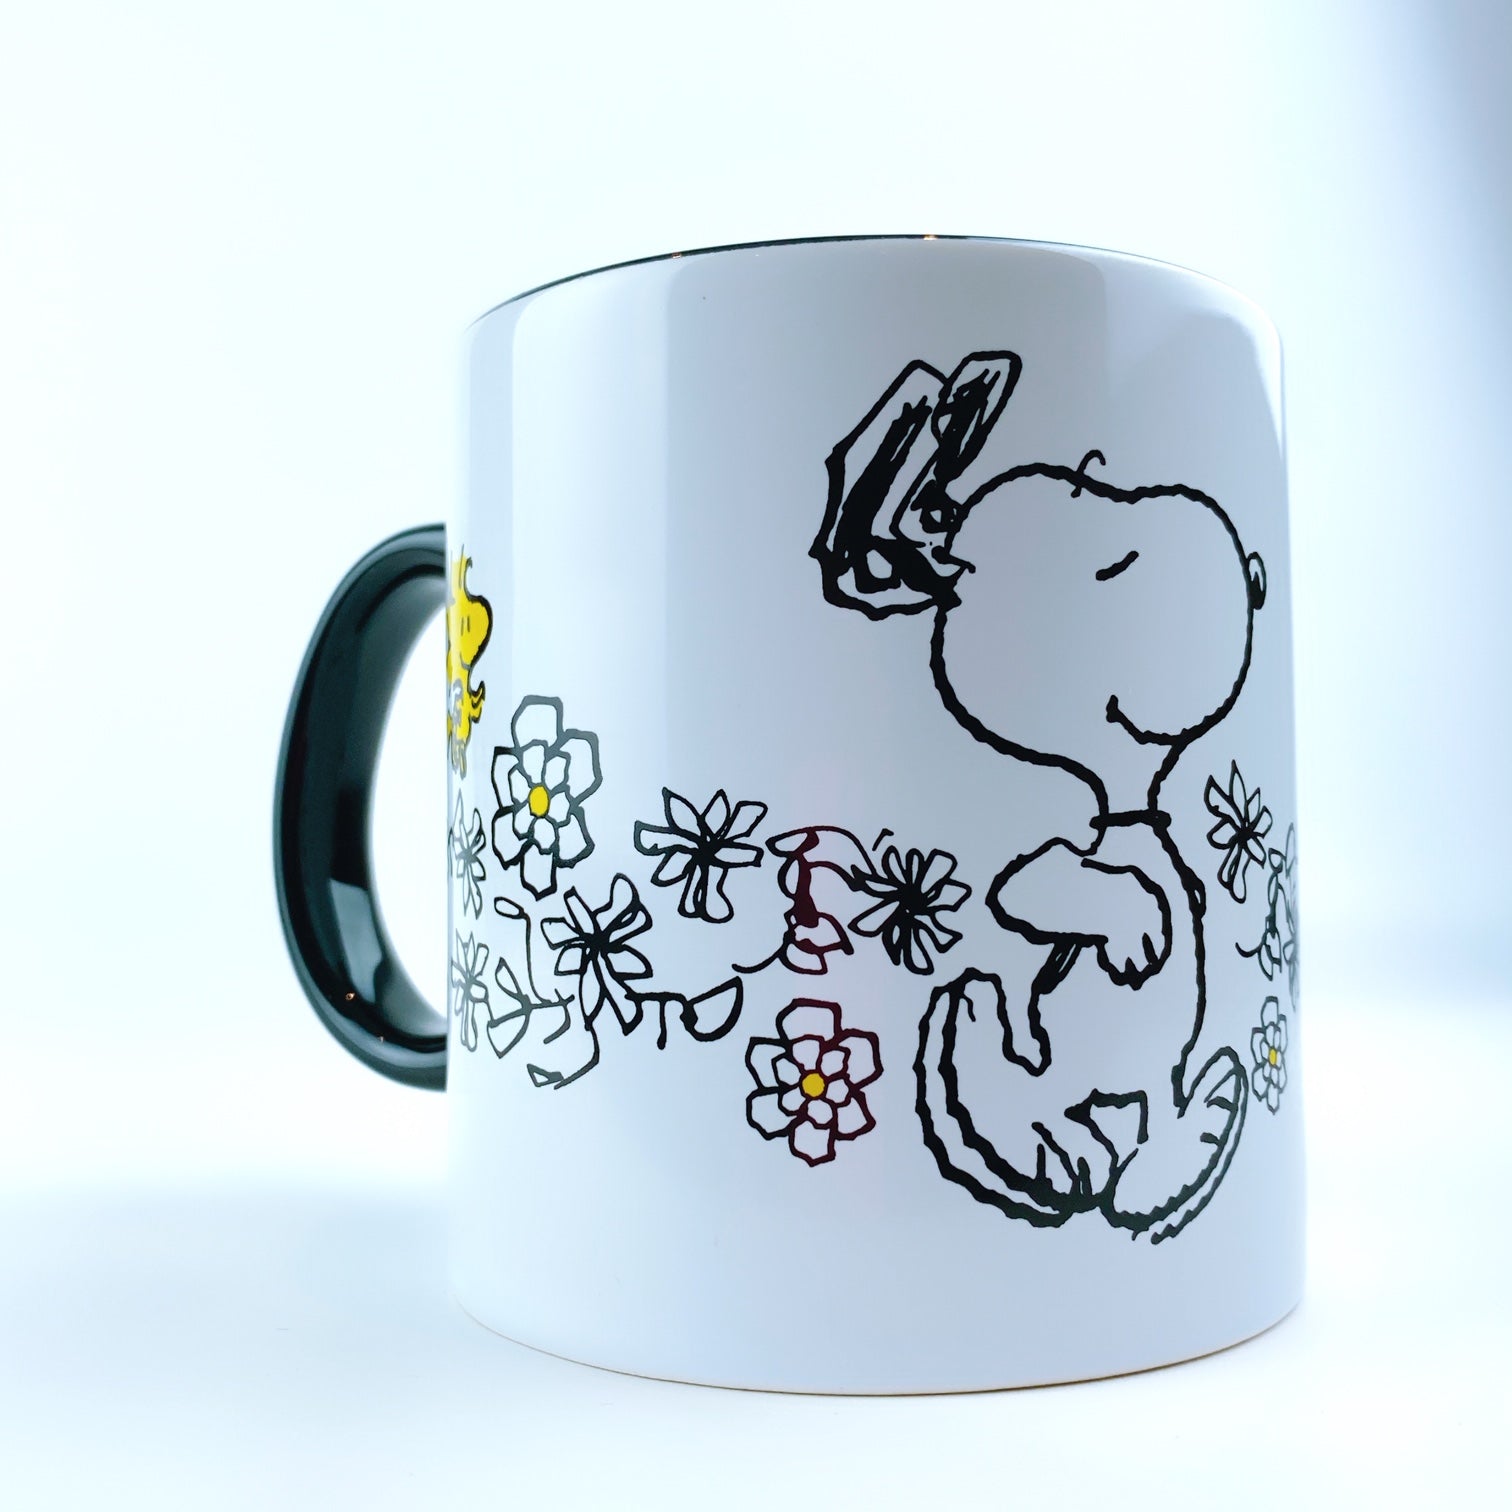 Snoopy Tumblers, Snoopy Mugs, Snoopy And Woodstock, Woodstock